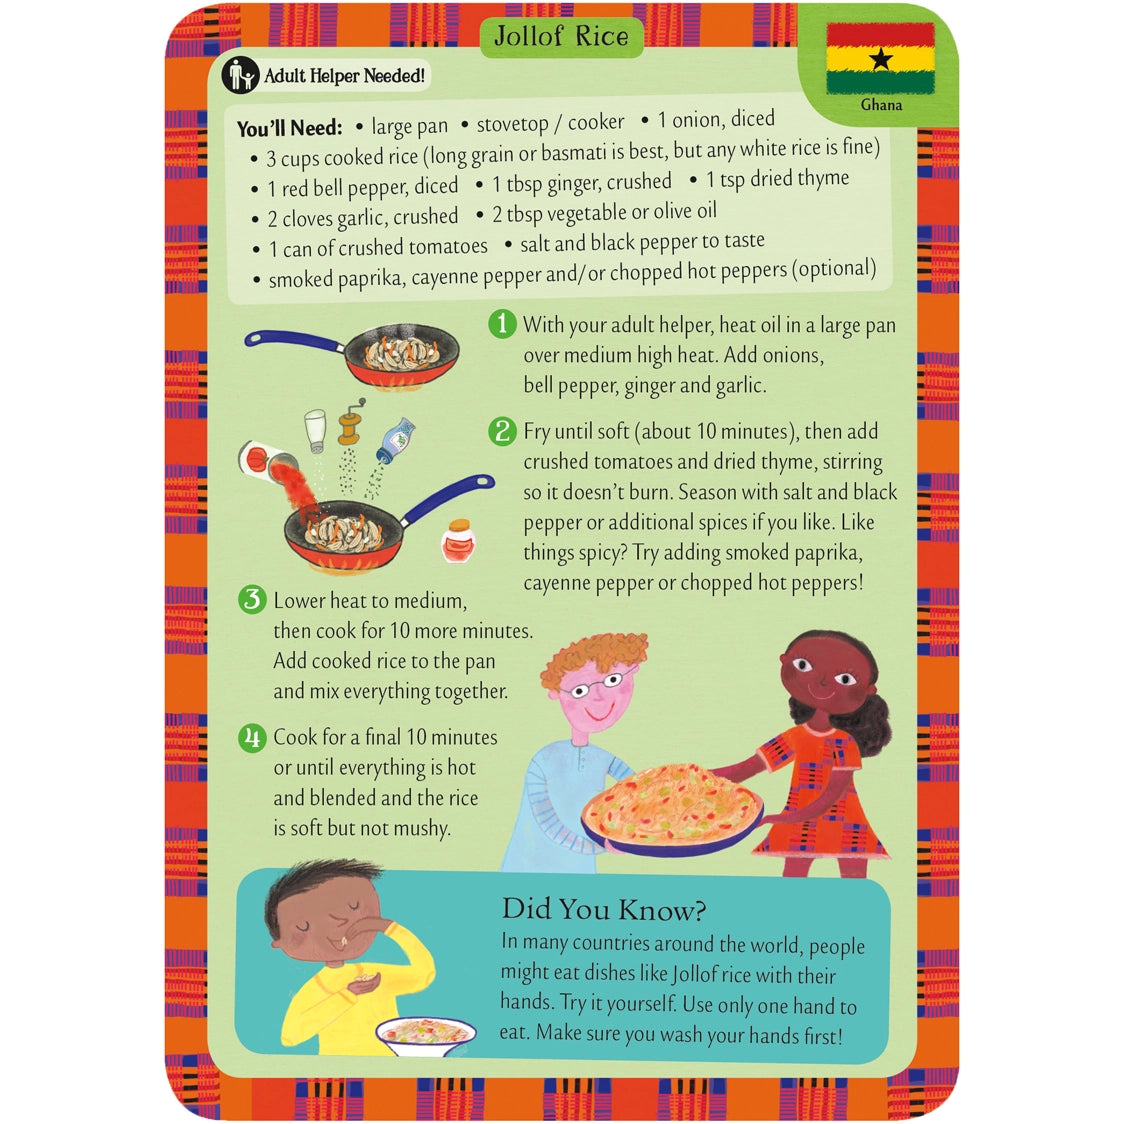 Global Kids - Children's Activity Cards by Barefoot Books. Activities for children from around the world.